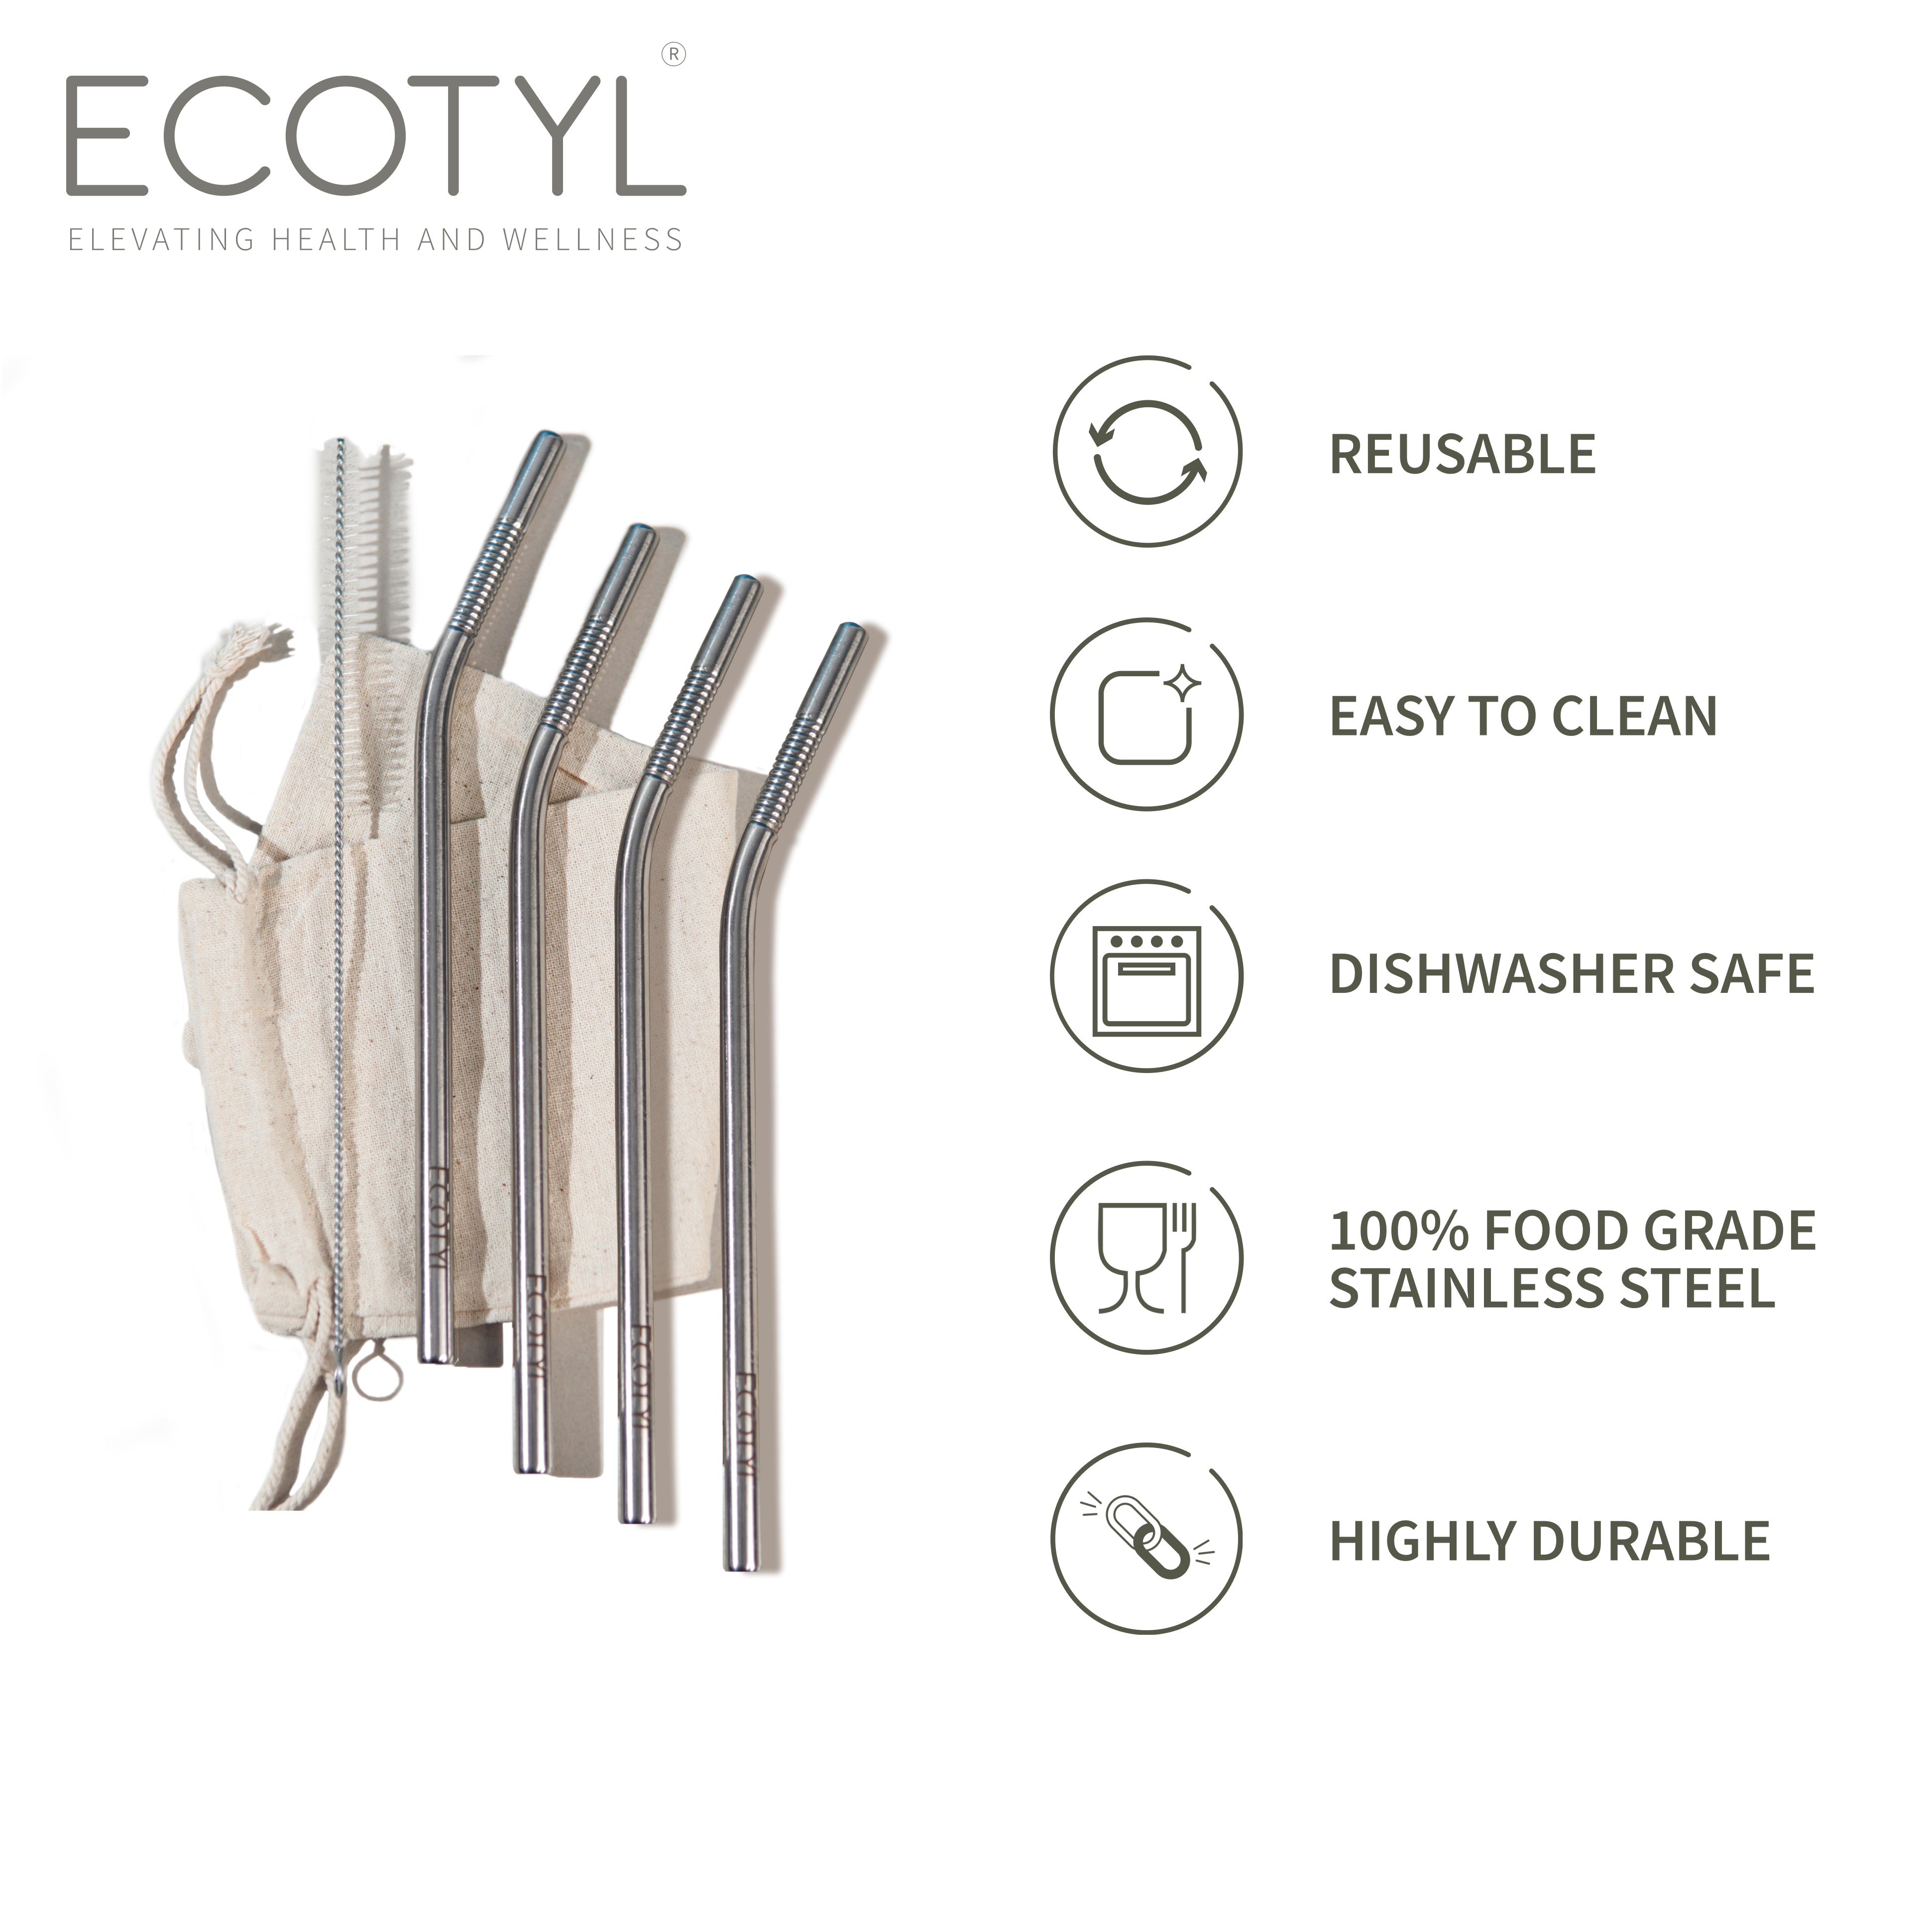 Ecotyl Stainless Steel Straw Bent with Cleaning Brush | Reusable Straws | Set of 4